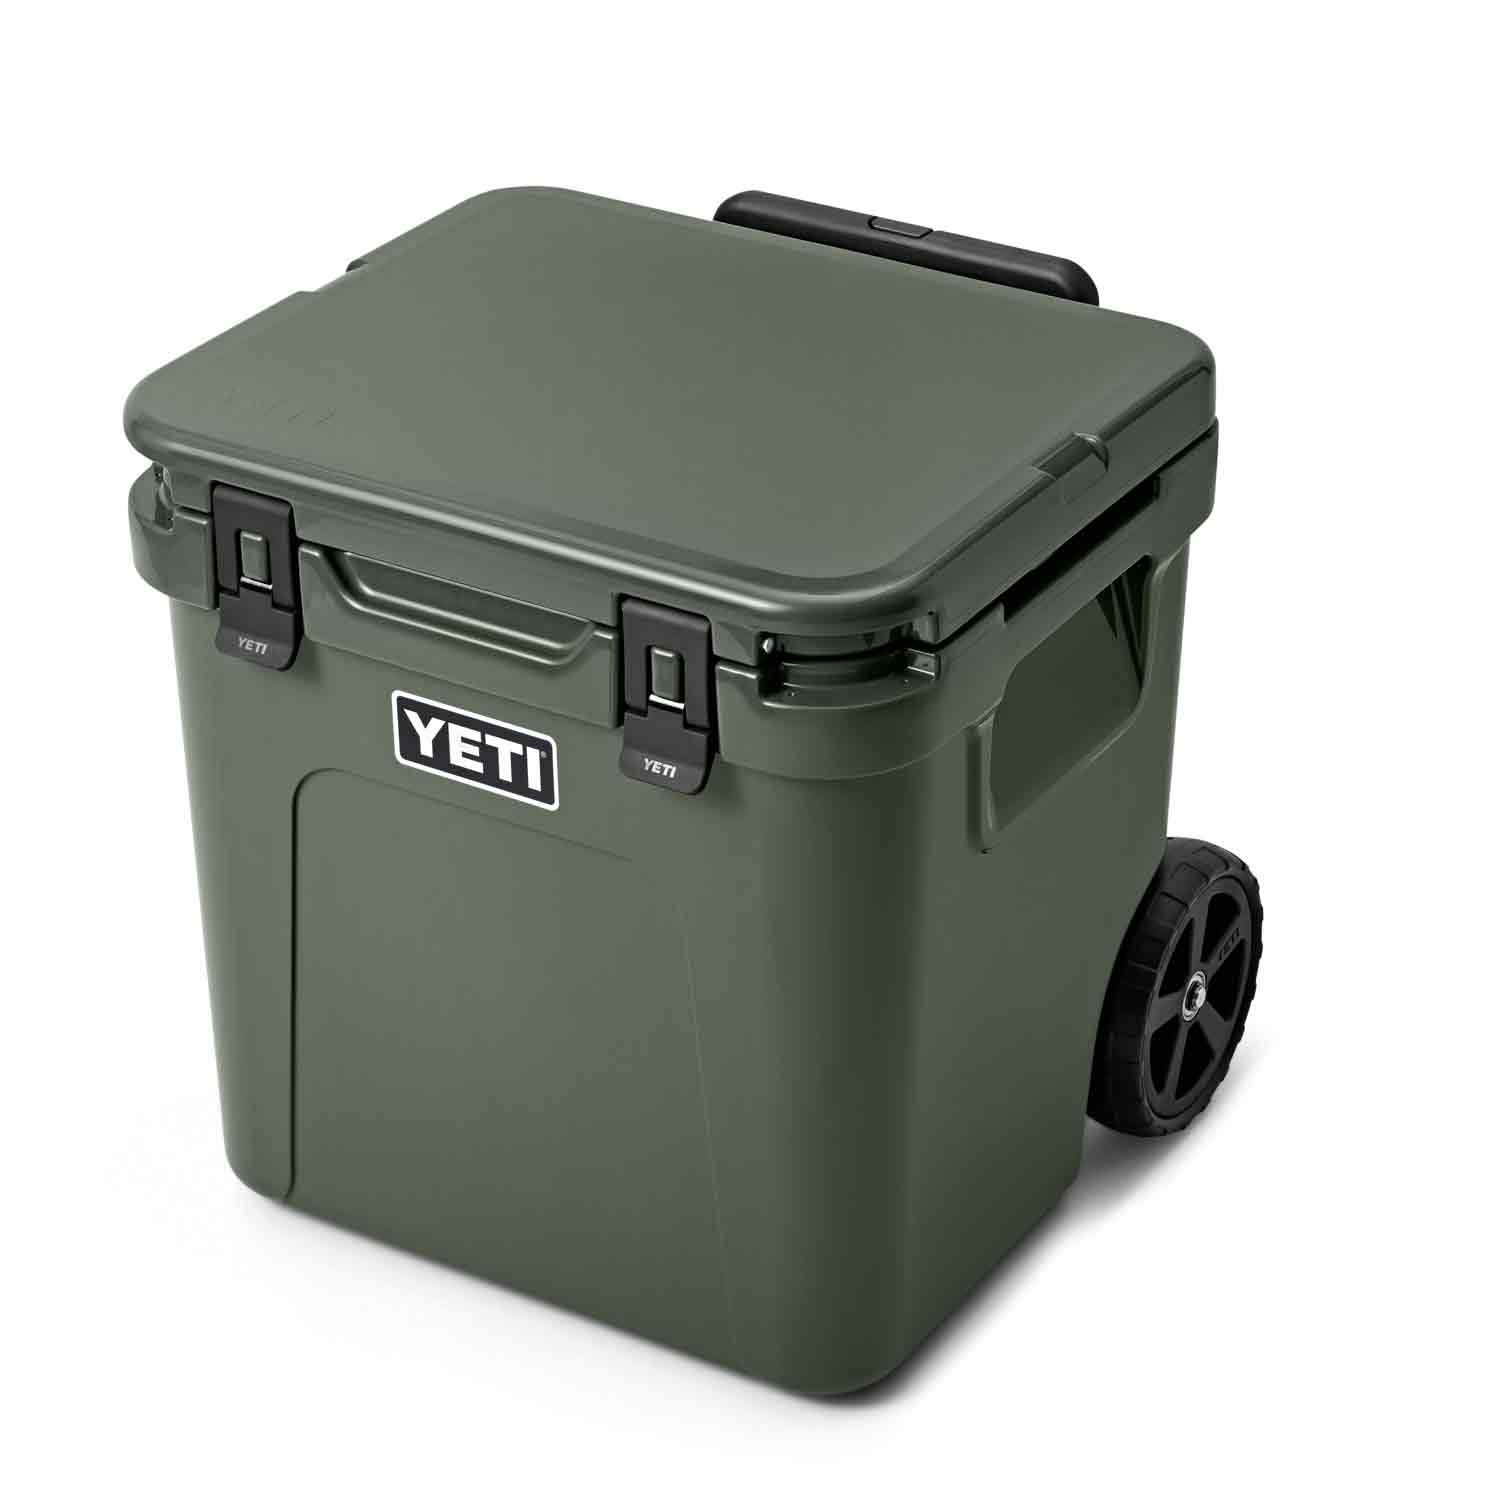 Yeti Roadie 48 Review: Best Portable Rolling Cooler?